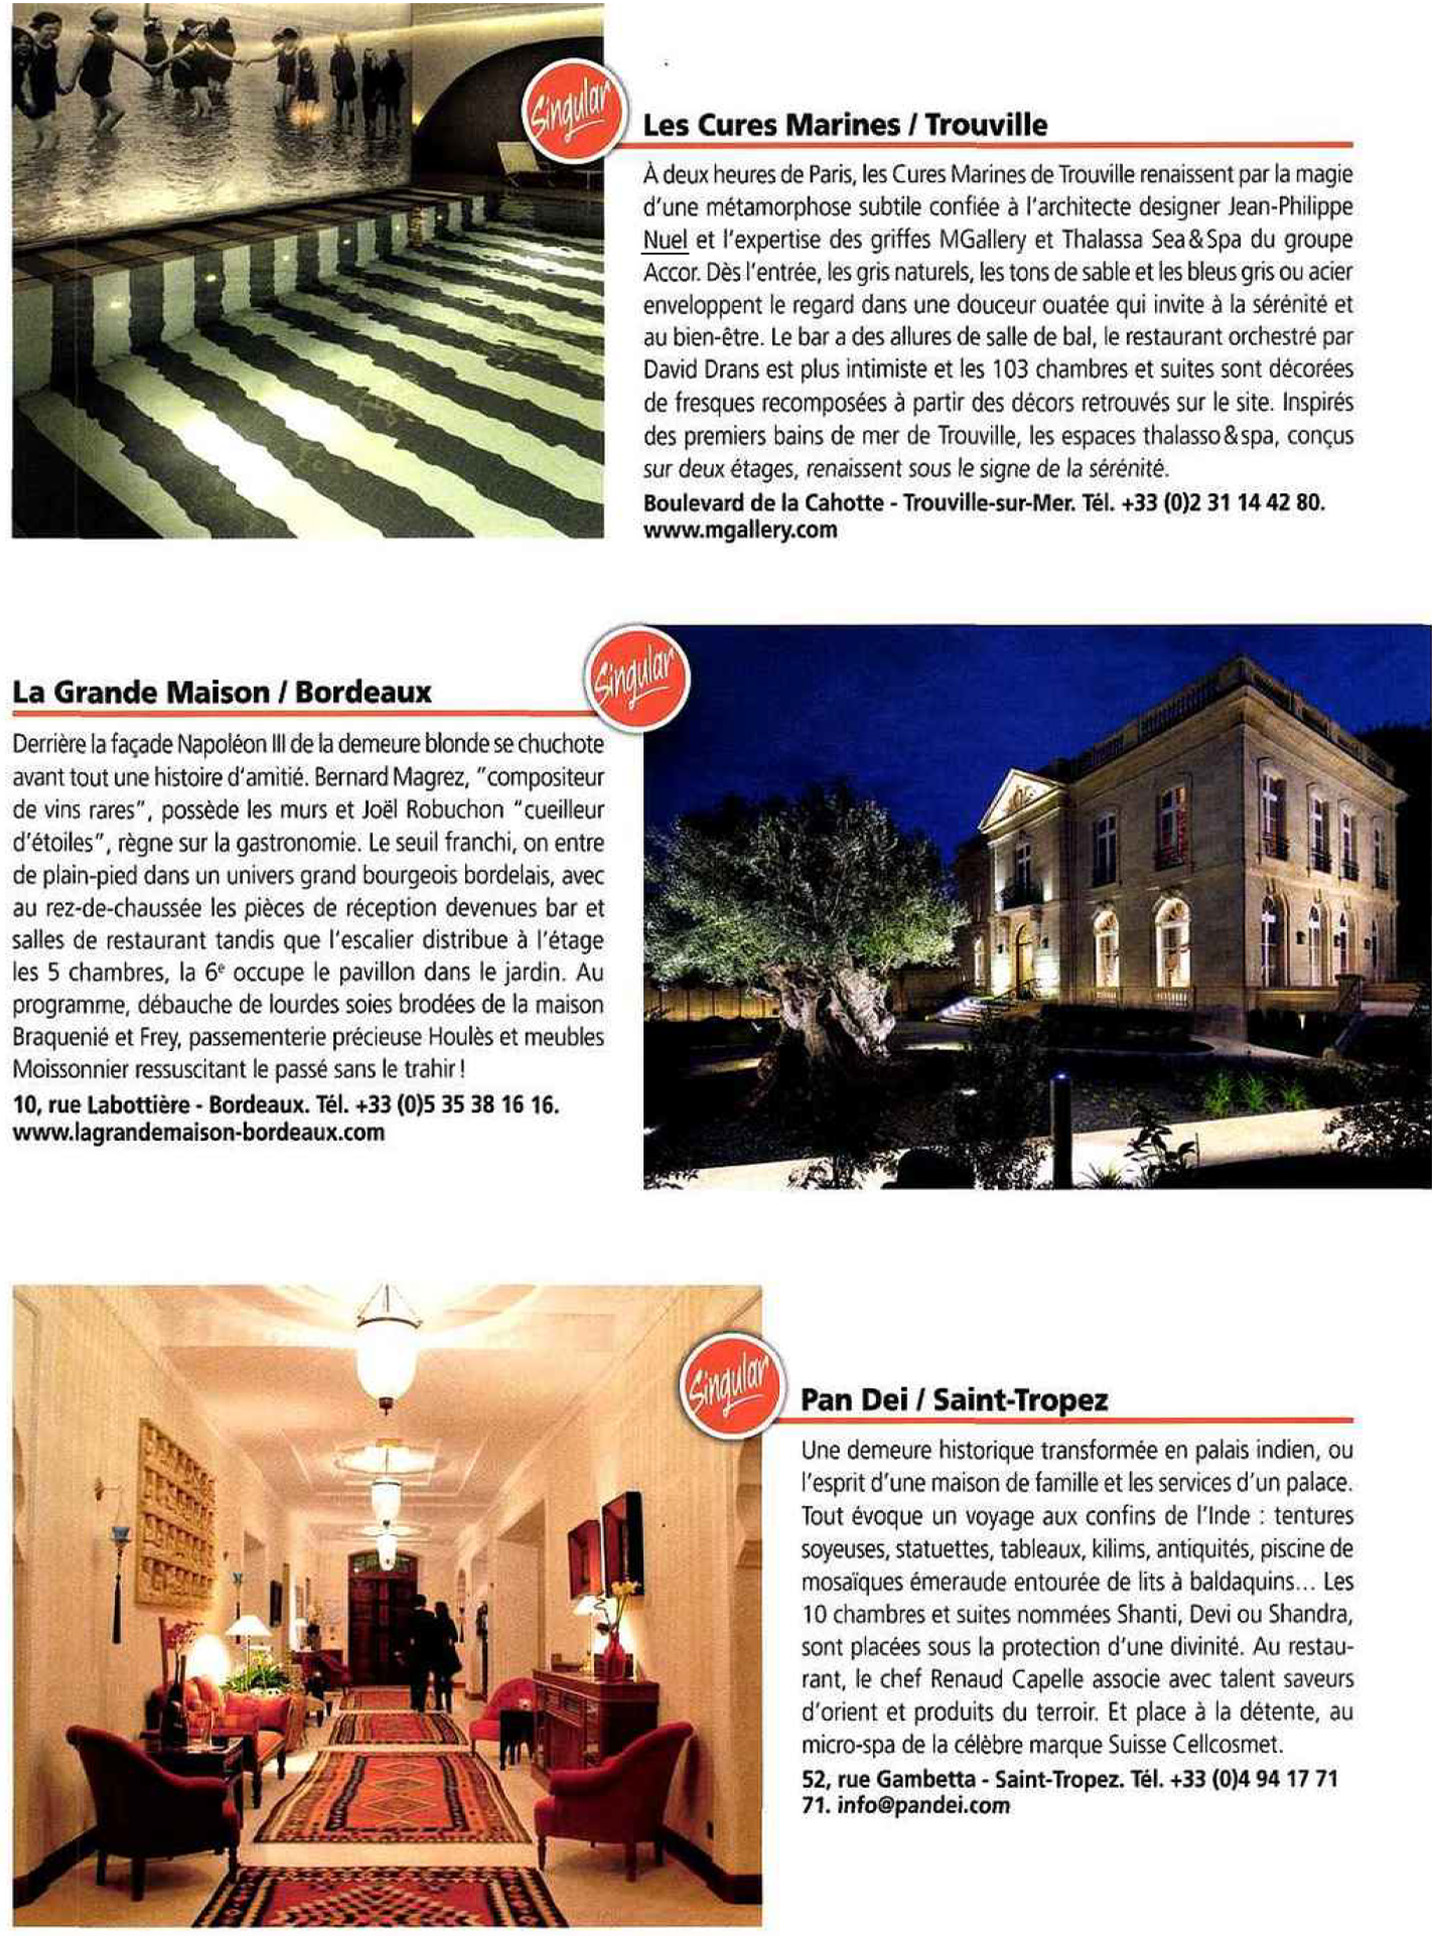 Article on the Cures marines de trouville designed by the interior design studio jean-philippe nuel in the magazine hotel & lodge, luxury hotel and spa